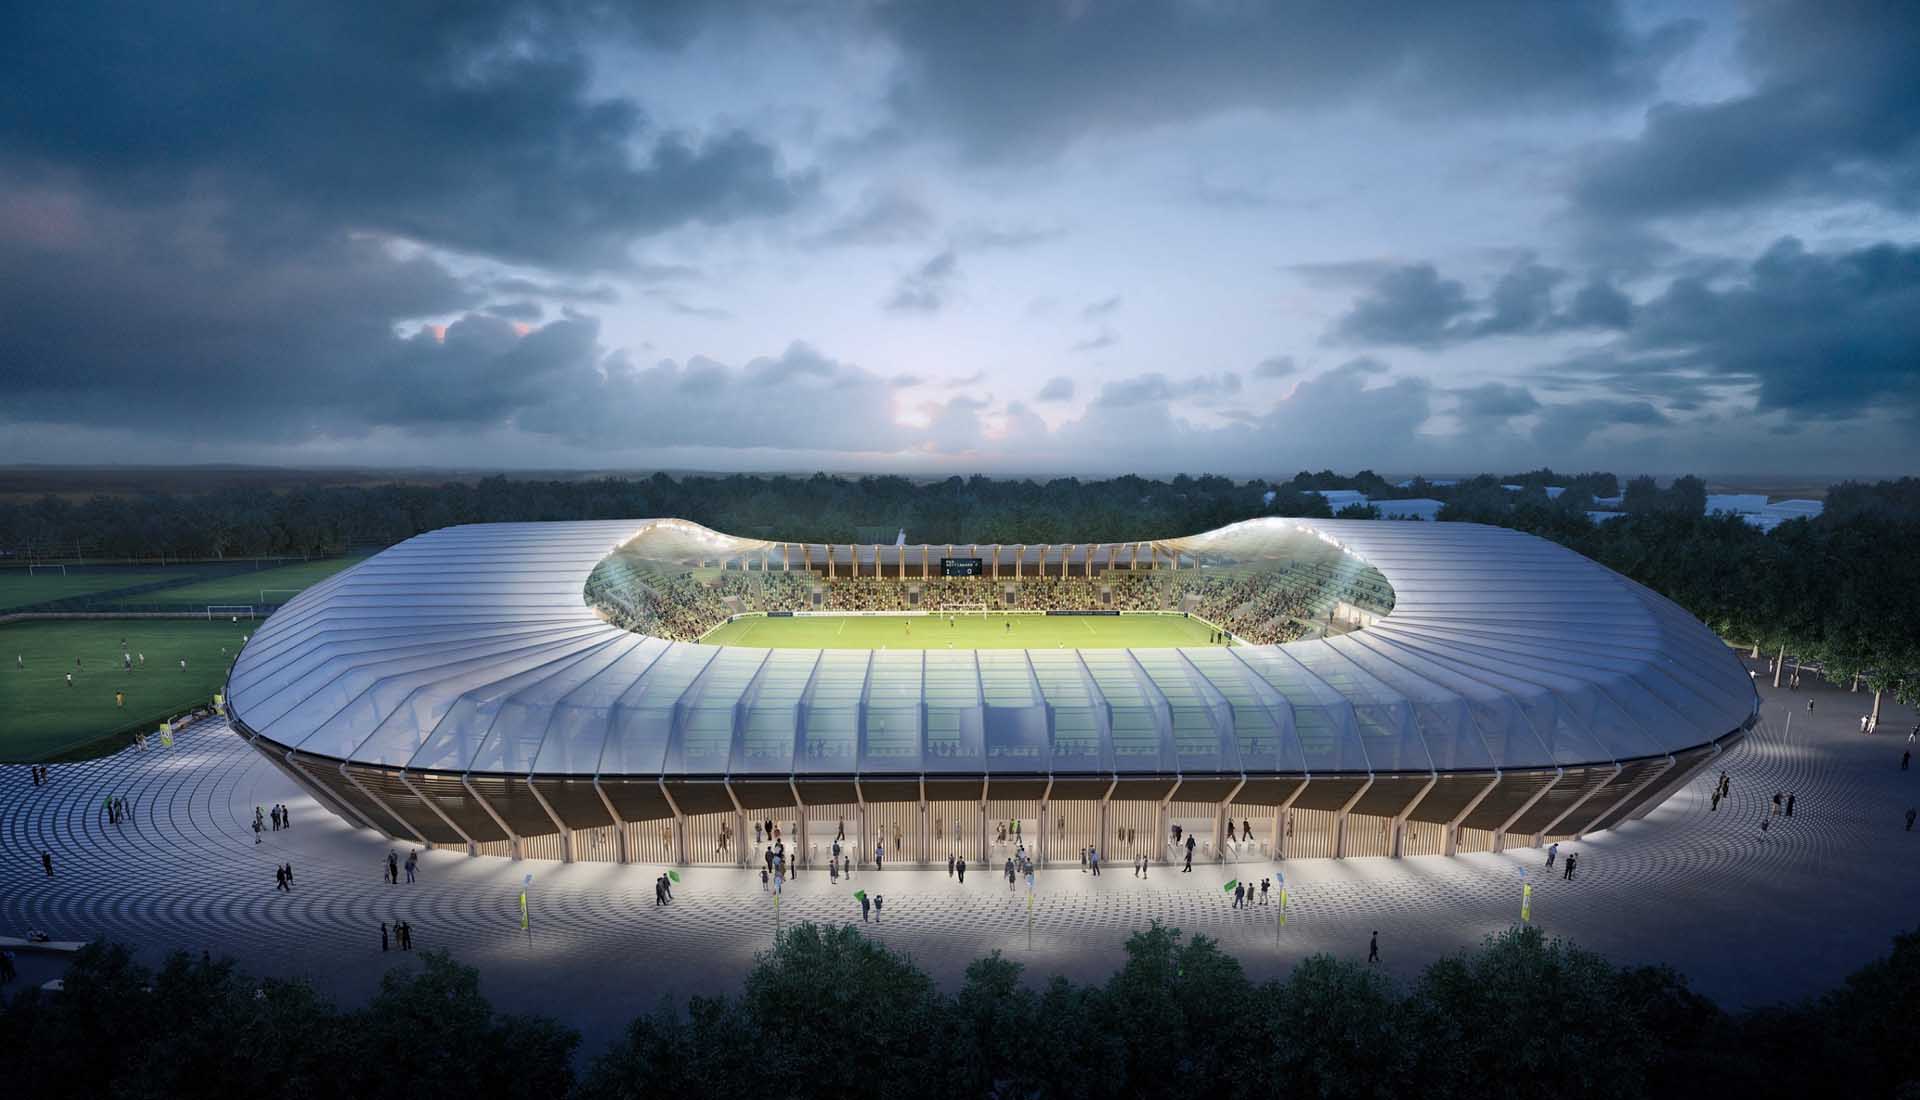 Forest Green Rovers' New Wooden Stadium Plans Approved - SoccerBible